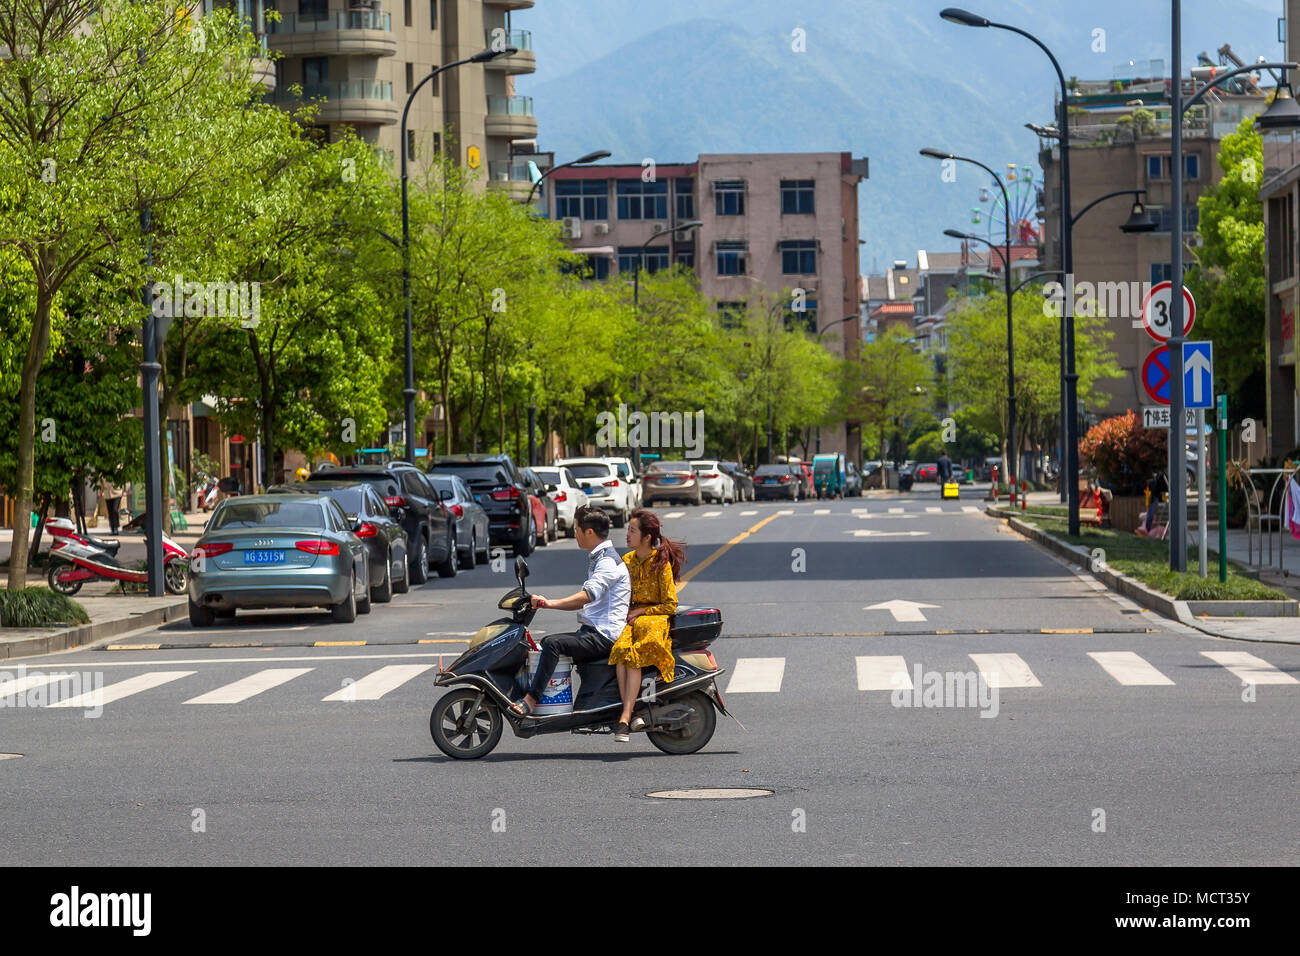 A young Chinese couple ride on a motor scooter. The girl wears a yellow dress and rides pillion sitting side saddle. Tonglu, Zhejiang Province, China. Stock Photo